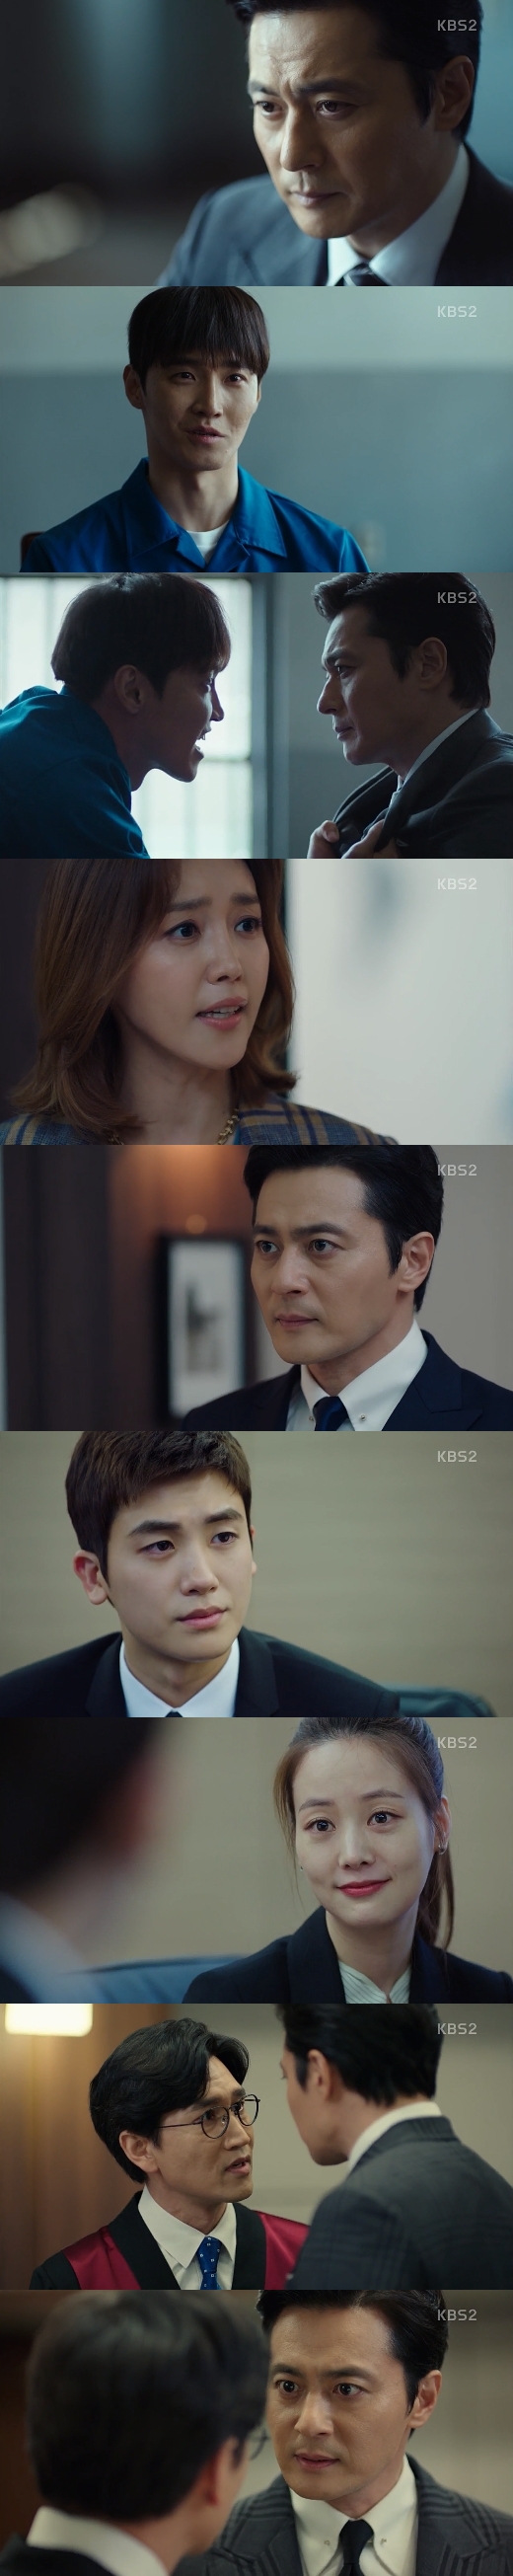 Suits Jang Dong-gun fell into a difficult situation.On the night of the 23rd, 9 episodes of KBS 2TVs tree drama Suits (played by Kim Jung-min) were broadcast.On that day, Miniforce Seok (Jang Dong-gun) visited Jang Seok-hyun (Jang In-seop).Jang Seok-hyun was sentenced to prison 12 years ago due to the destruction of evidence and unfair falsification in the case where Miniforce participated as the first trial prosecutor.Jang Seok-hyun said, I forgot to be a murderer, did you decide?Jang Seok-hyun refused the Miniforce seats New Trial offer, and Jang Seok-hyun shouted to Miniforce, I will fill the sentence you made and go out and get everything back!The person who turned this mind was Ko Yeon-woo (Park Hyung-sik), who persuaded him to receive the New Trial for his murdered lover Kim Min-joo, not Miniforce.So Jang Seok-hyun decided to receive the New Trial.Miniforce visited the prosecution office for Jang Seok-hyuns New Trial. He found out that the evidence that the prosecutor had to take off his clothes was circulating inside the prosecution and Chirashi.Miniforce, who was angry at this, returned to Kang & Ham and questioned Hong Da-ham (Chae Jeong-an).Hong Da-ham said he could not keep watching the Miniforce stone collapse, and said he had no choice but to disclose it.Miniforce told Hong Daham coldly, I never thought to fire you because I believed in you, not because you care about me.The New Trial began: Prosecutors claimed that new evidence was found that Jang Seok-hyun detained and assaulted his girlfriend and forced her to administer drugs.I guess Ive got a rough idea of ​​turning around this floor now, he said to Miniforce.On the other hand, Ko Yeon-woo has solved the hit-and-run case alone, saying that Miniforce did not want to join the prosecutors self-development program, which wants to win his reputation.Ko Yeon-woo, who met with Kim, learned that he was grinding it on Miniforce in the prosecution.Kim, who is giving tolerance to Miniforce Seok, asked the price, and Kim revealed the intention to be in the eyes of Miniforce Seok of Kang & Ham.